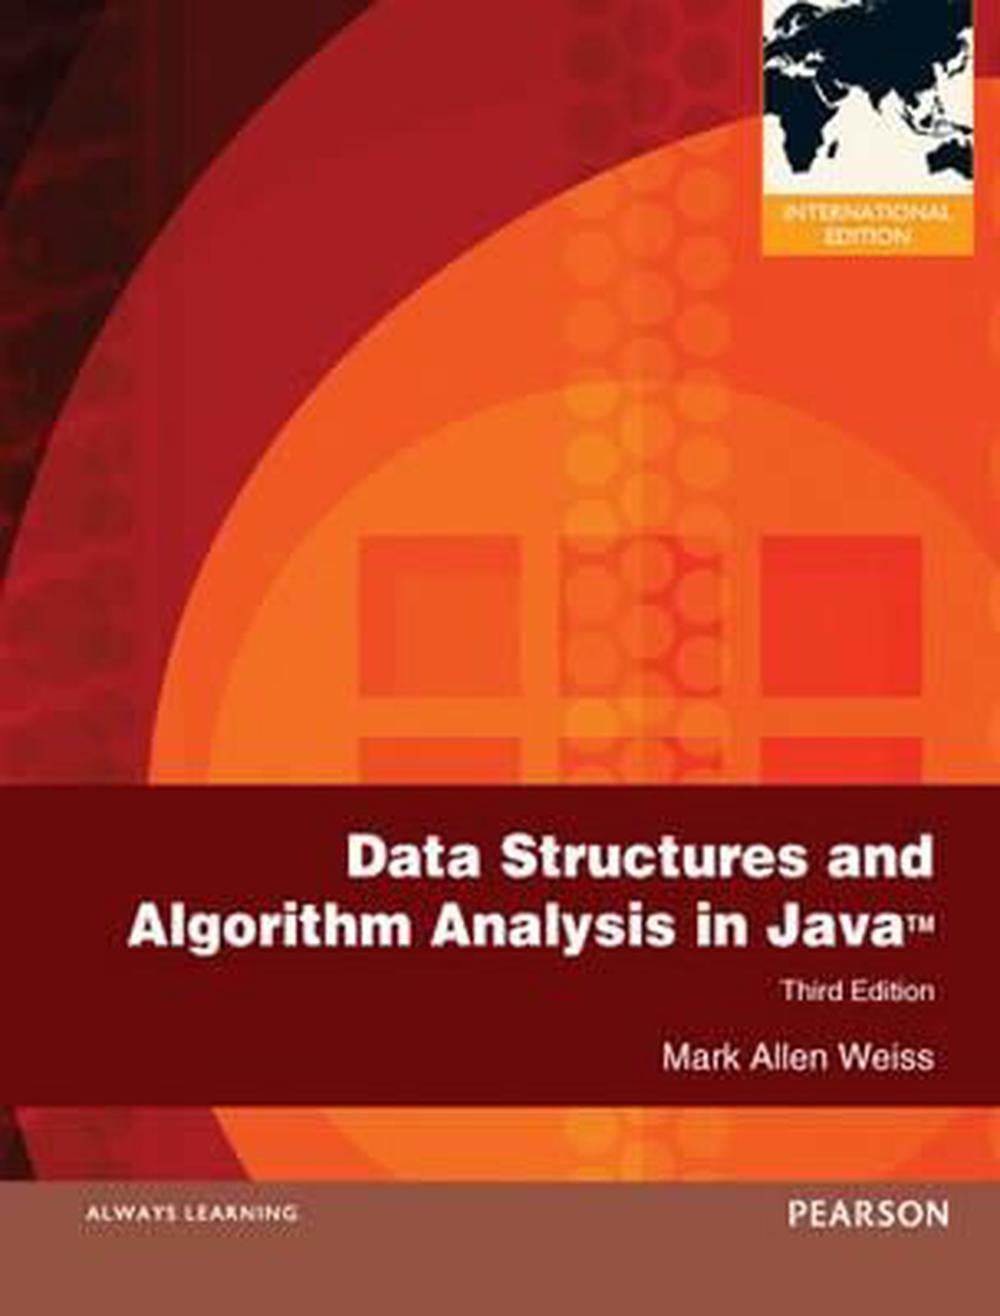 textbook data structures and problem solving using java